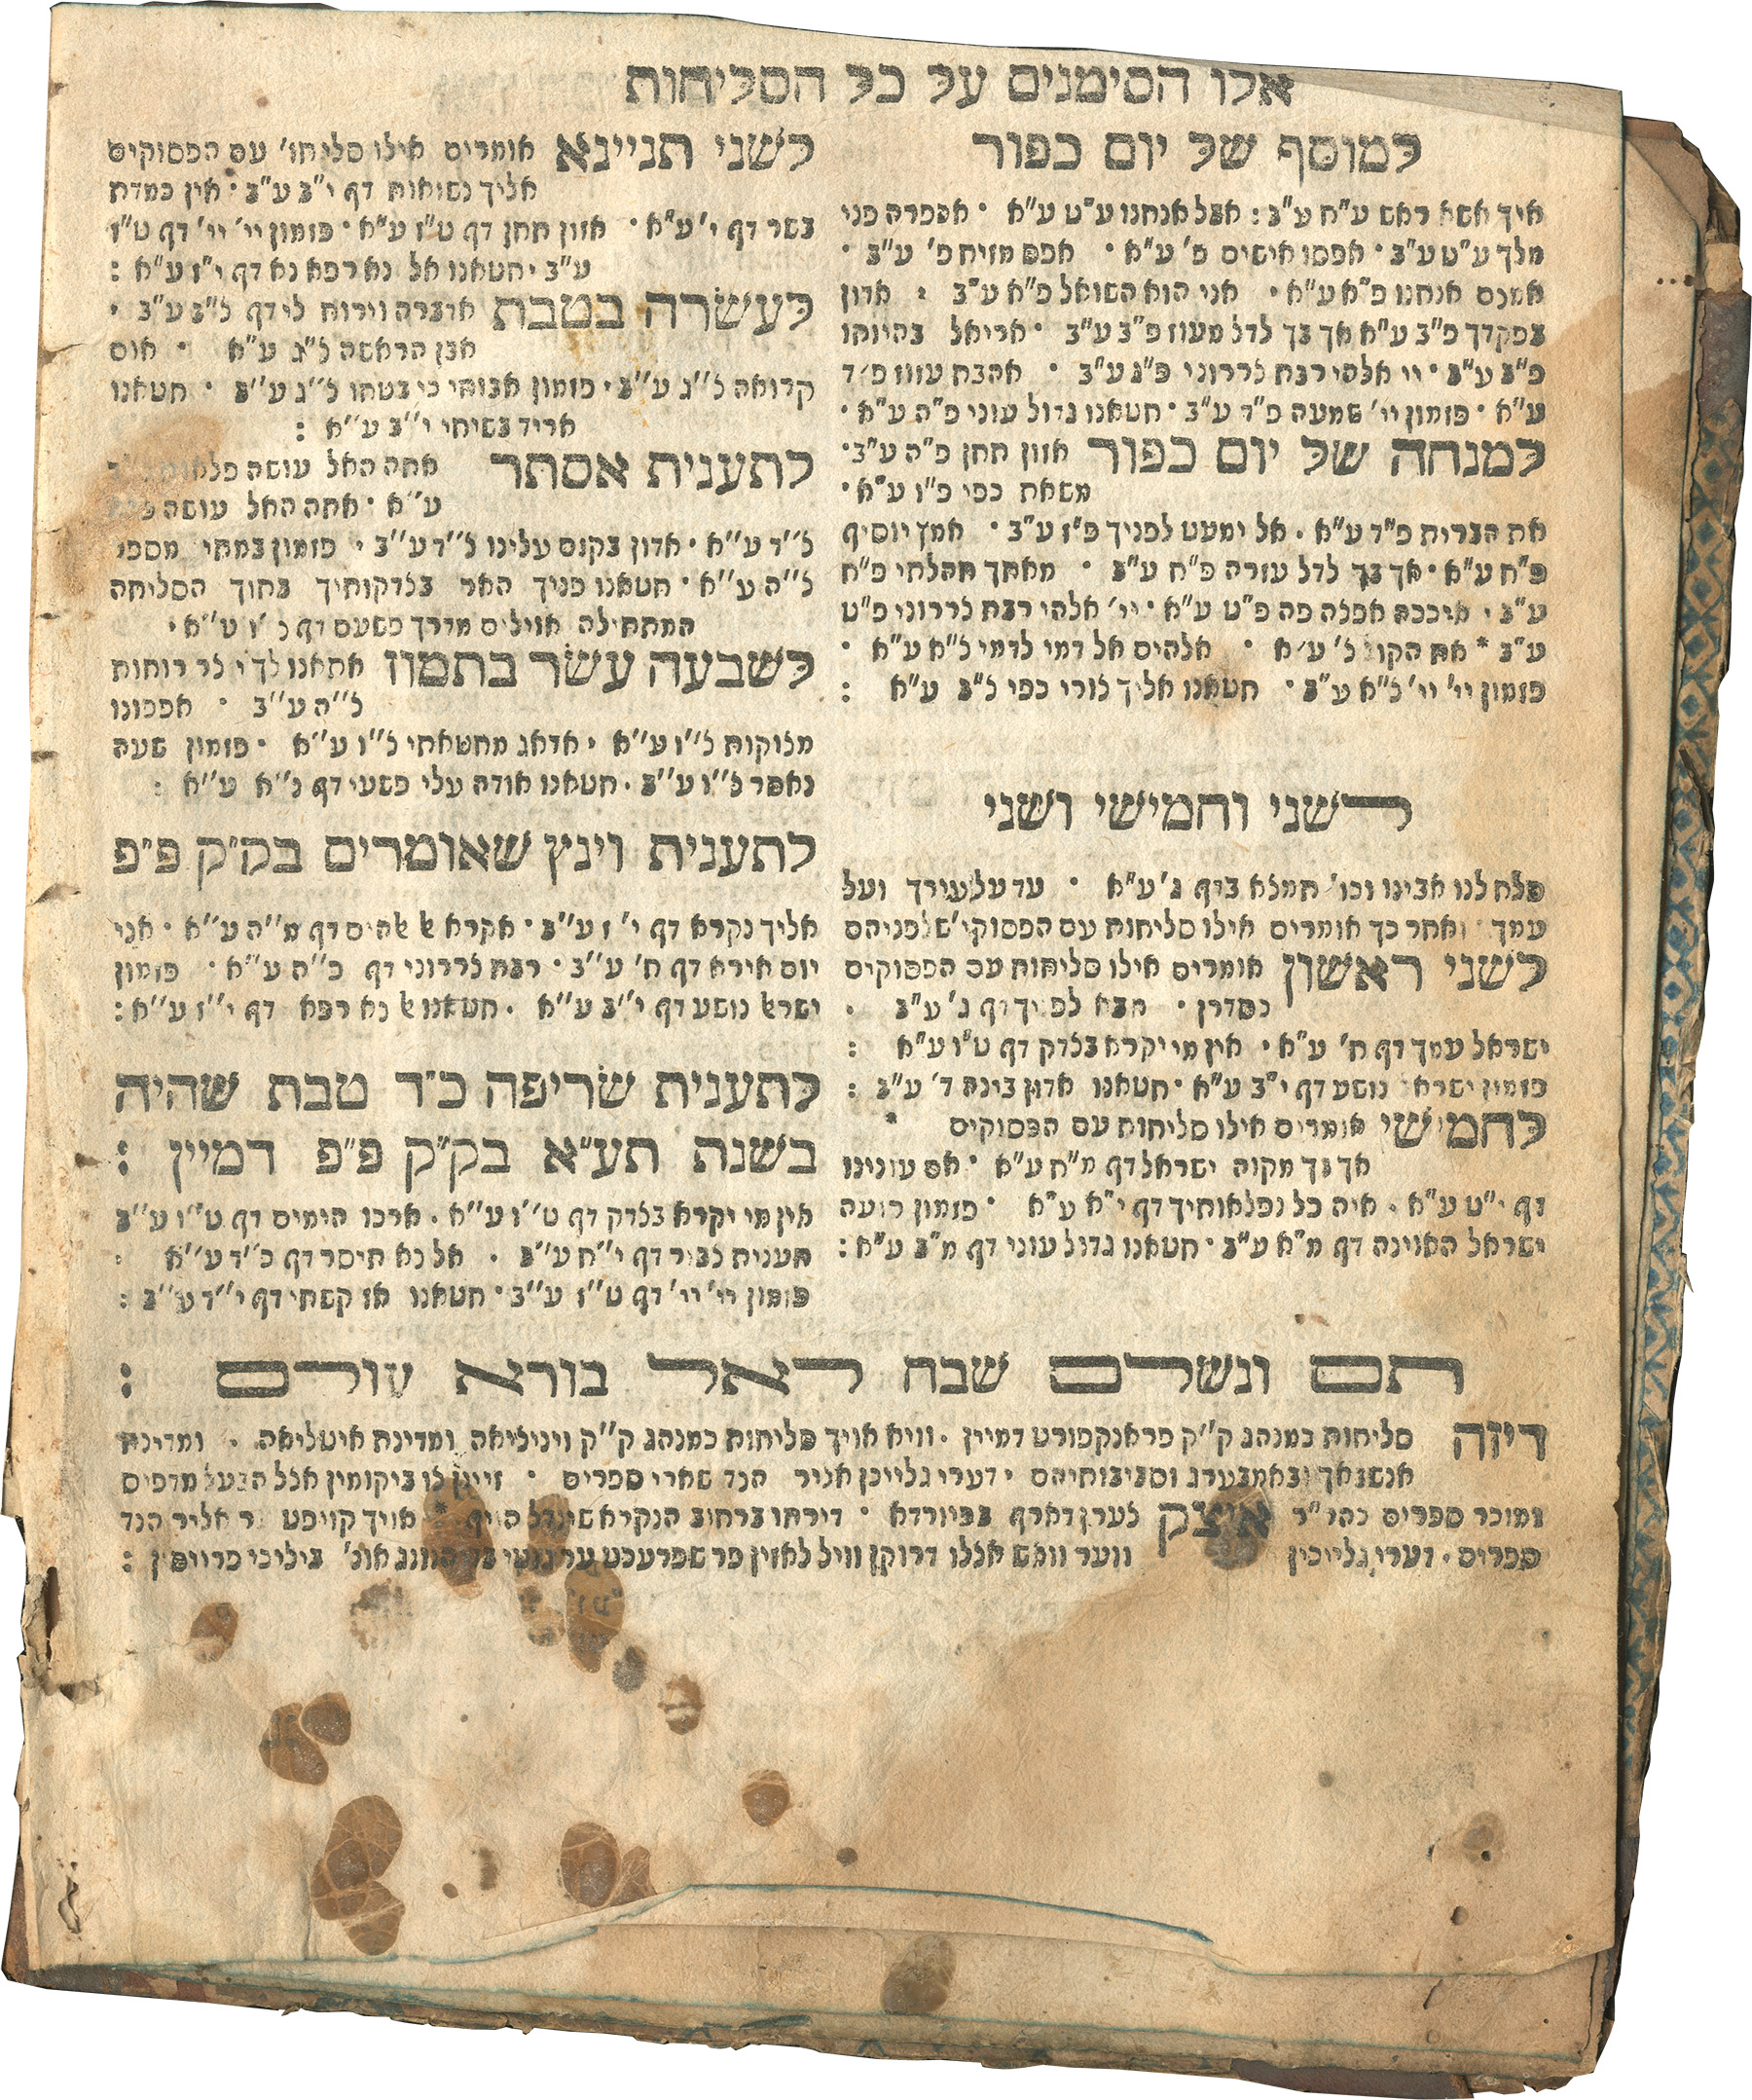 Last page (tam ve-nishlam) with printer's advertisement at bottom